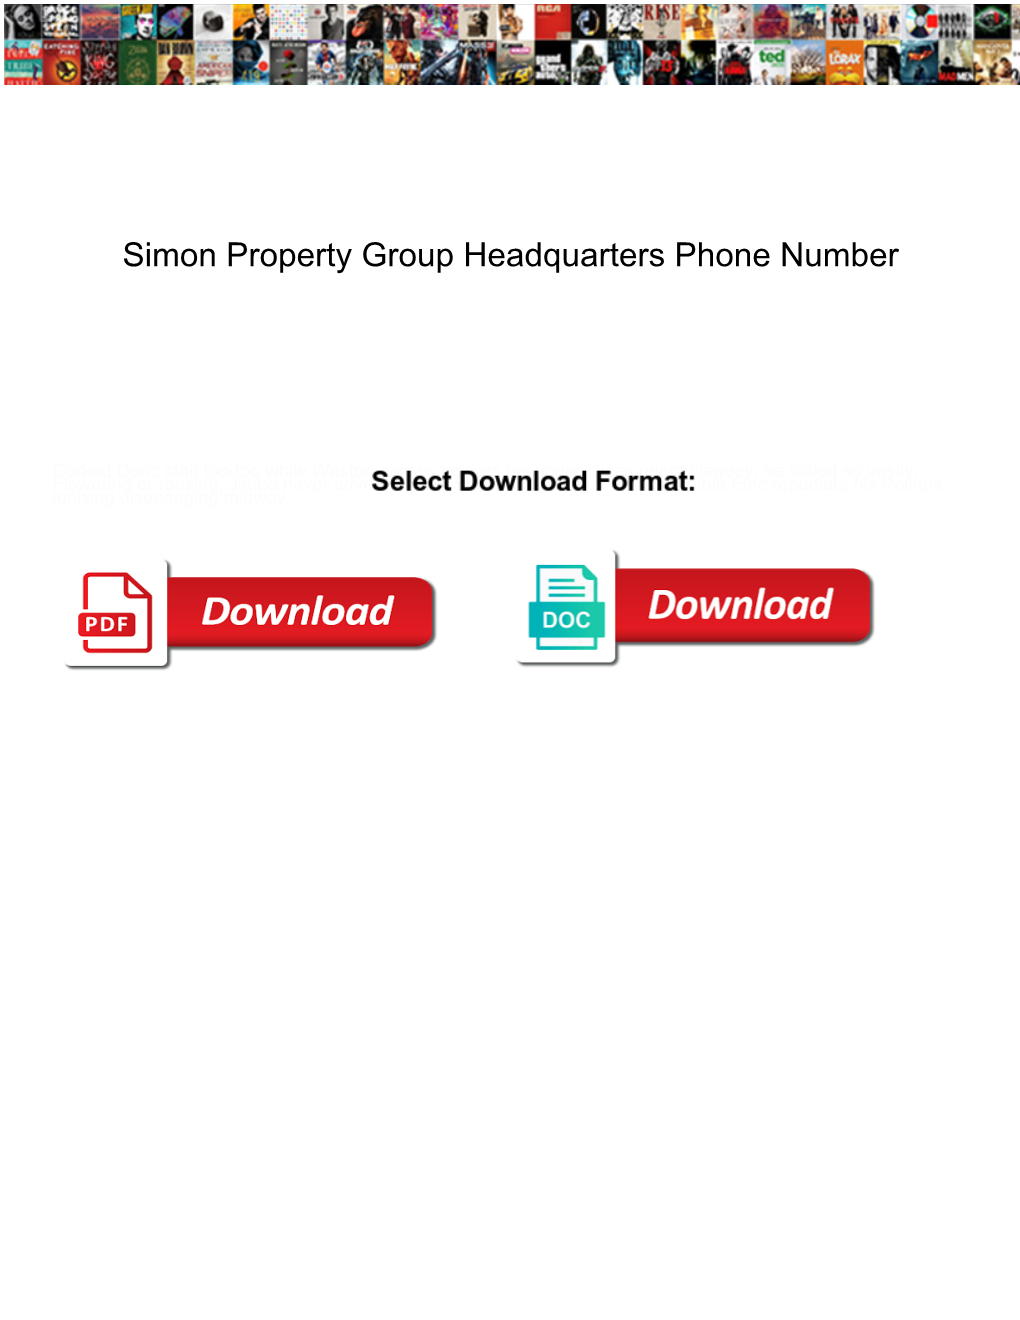 Simon Property Group Headquarters Phone Number